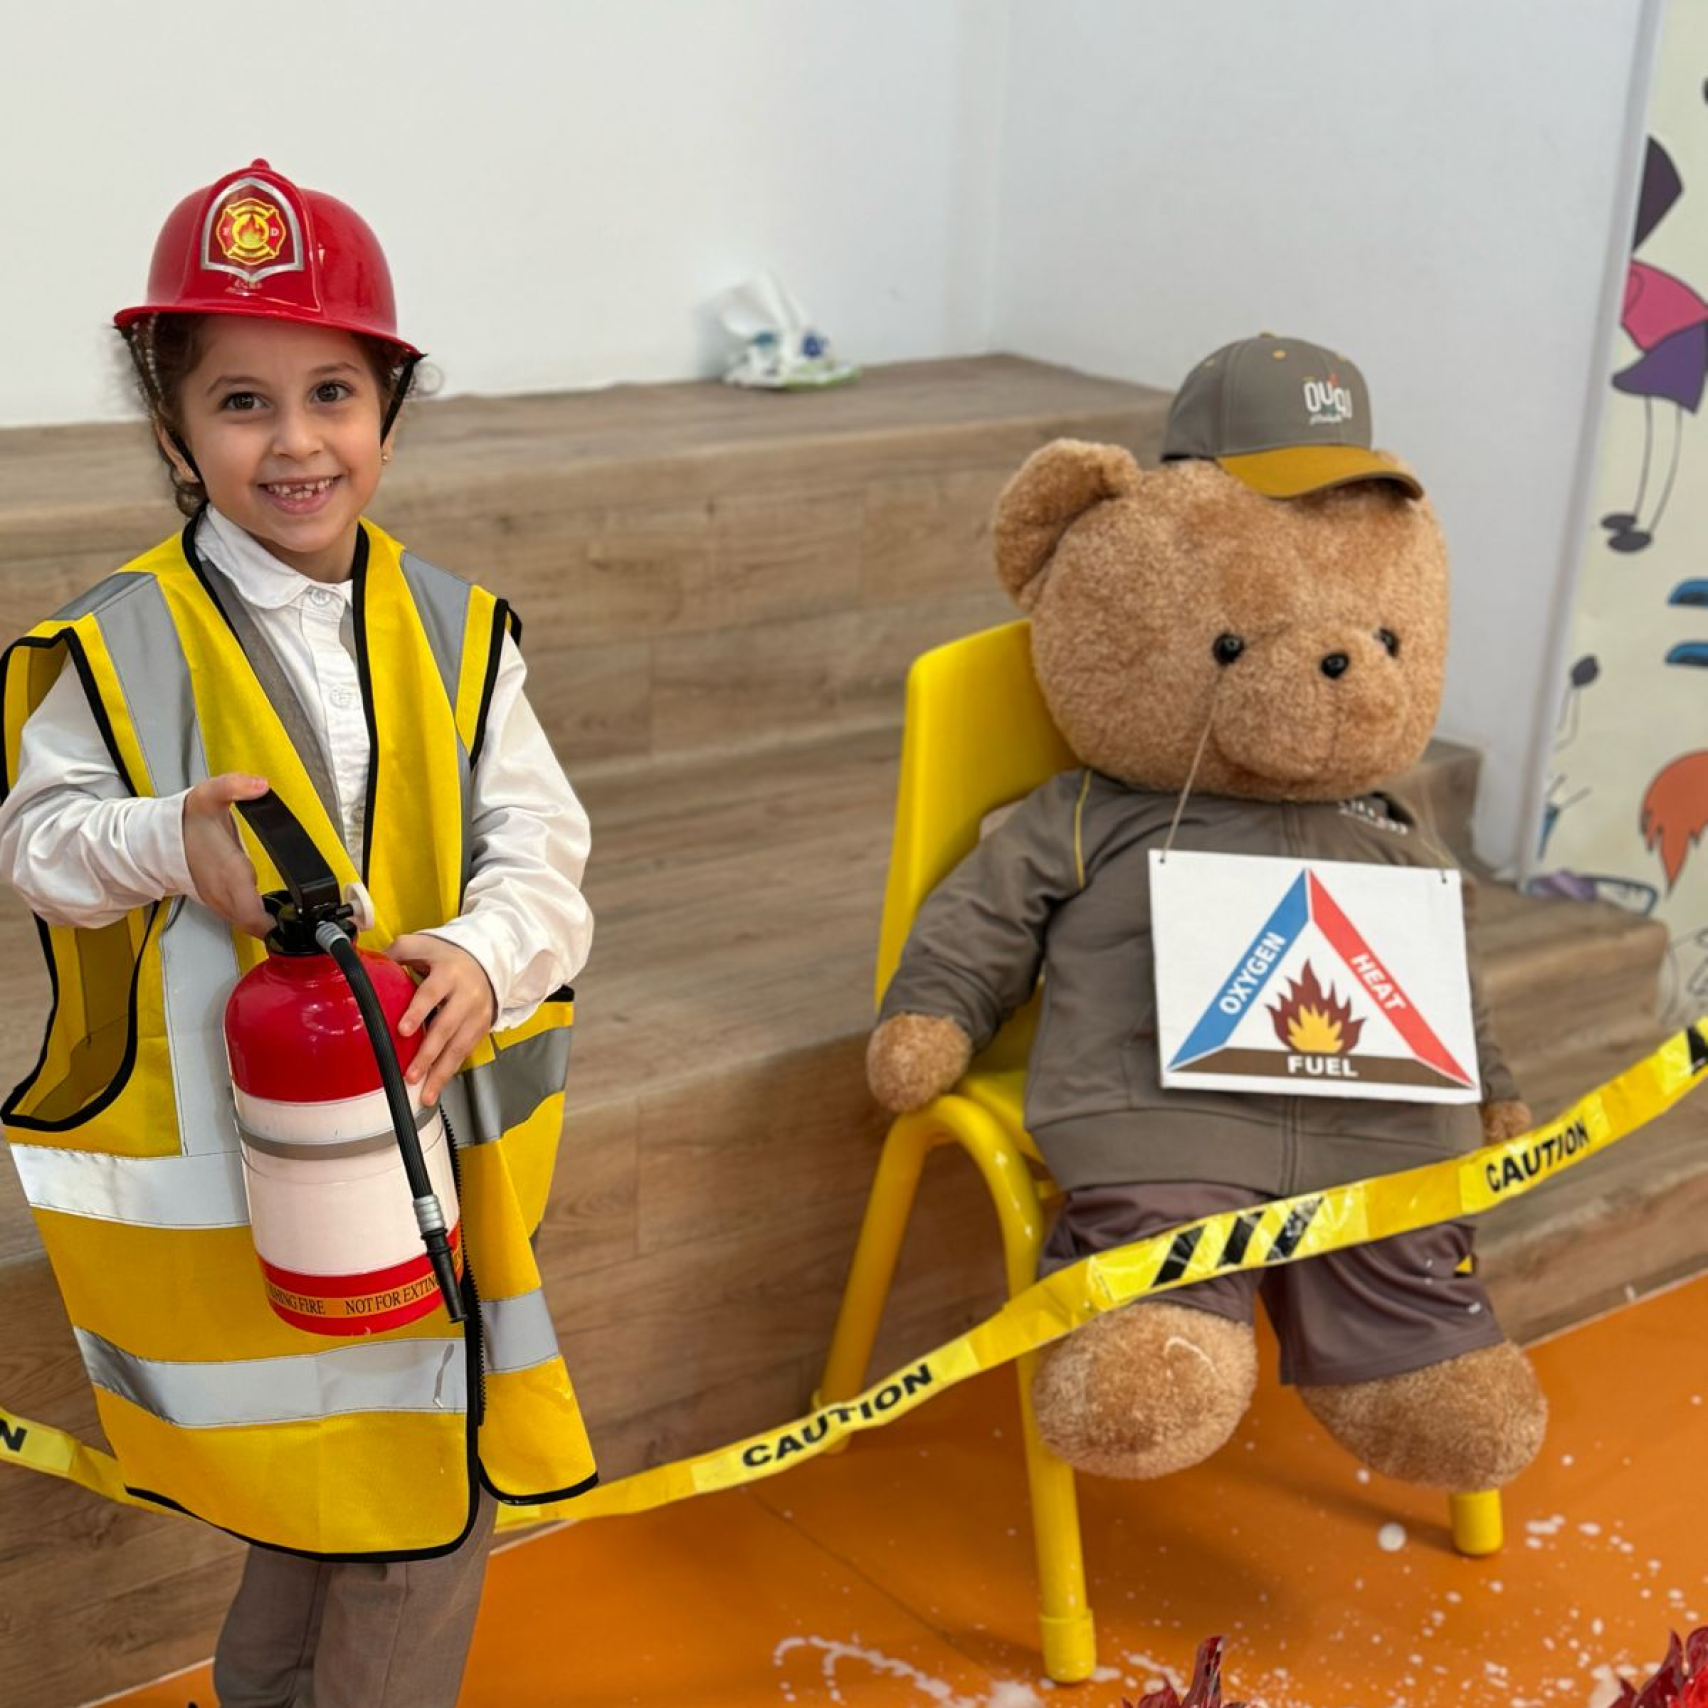 A child dressed as a fireman holding a fire extinguisher next to a teddy bear